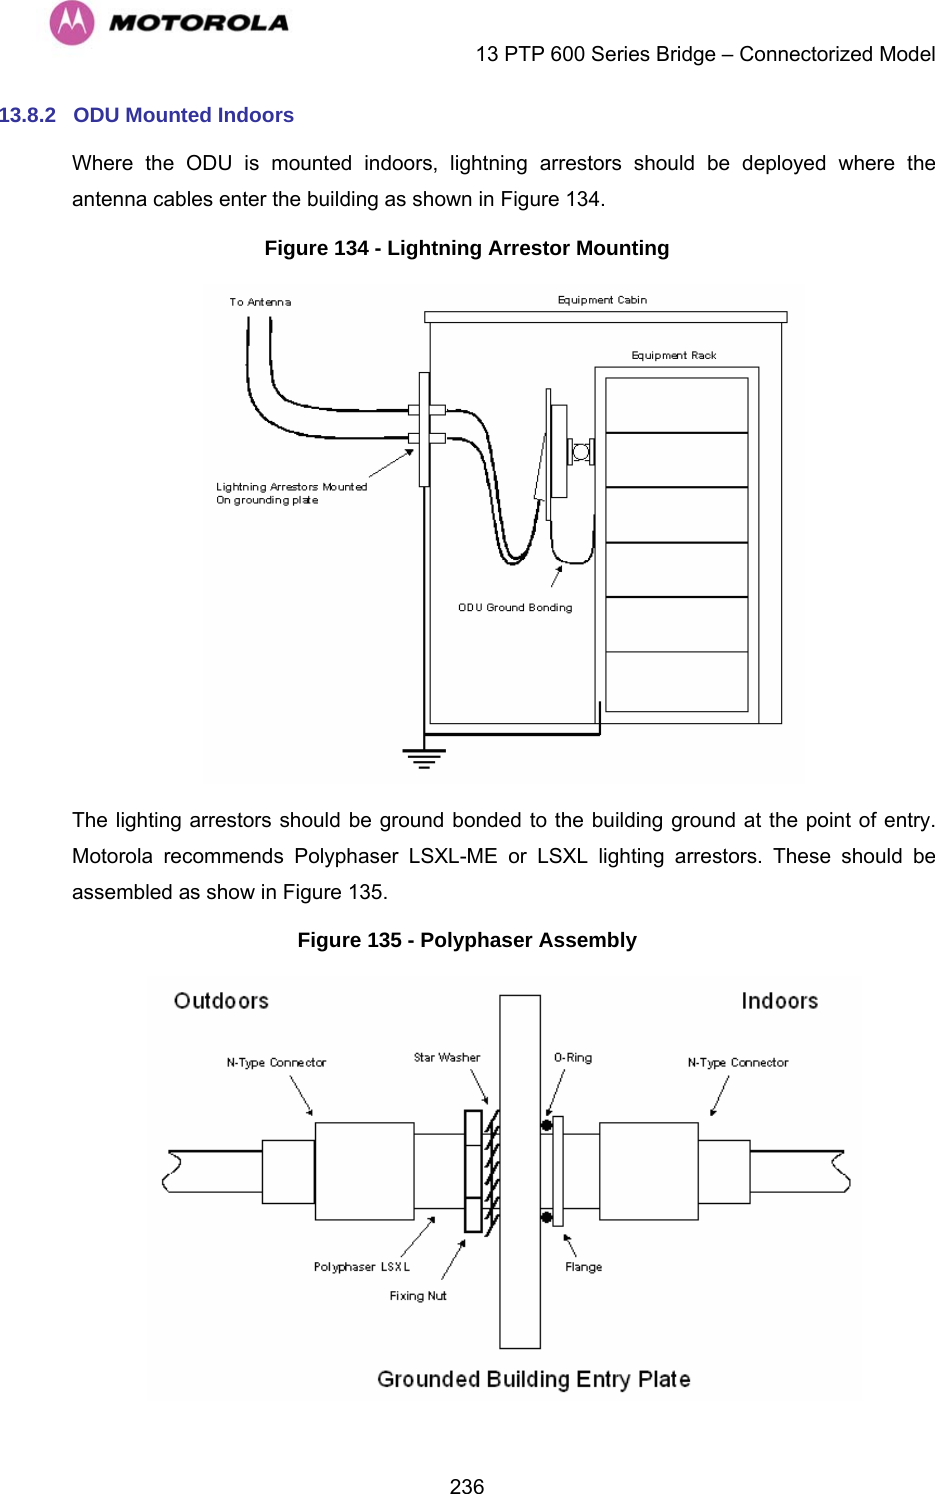    13 PTP 600 Series Bridge – Connectorized Model  23613.8.2  ODU Mounted Indoors Where the ODU is mounted indoors, lightning arrestors should be deployed where the antenna cables enter the building as shown in Figure 134. Figure 134 - Lightning Arrestor Mounting  The lighting arrestors should be ground bonded to the building ground at the point of entry. Motorola recommends Polyphaser LSXL-ME or LSXL lighting arrestors. These should be assembled as show in Figure 135. Figure 135 - Polyphaser Assembly  